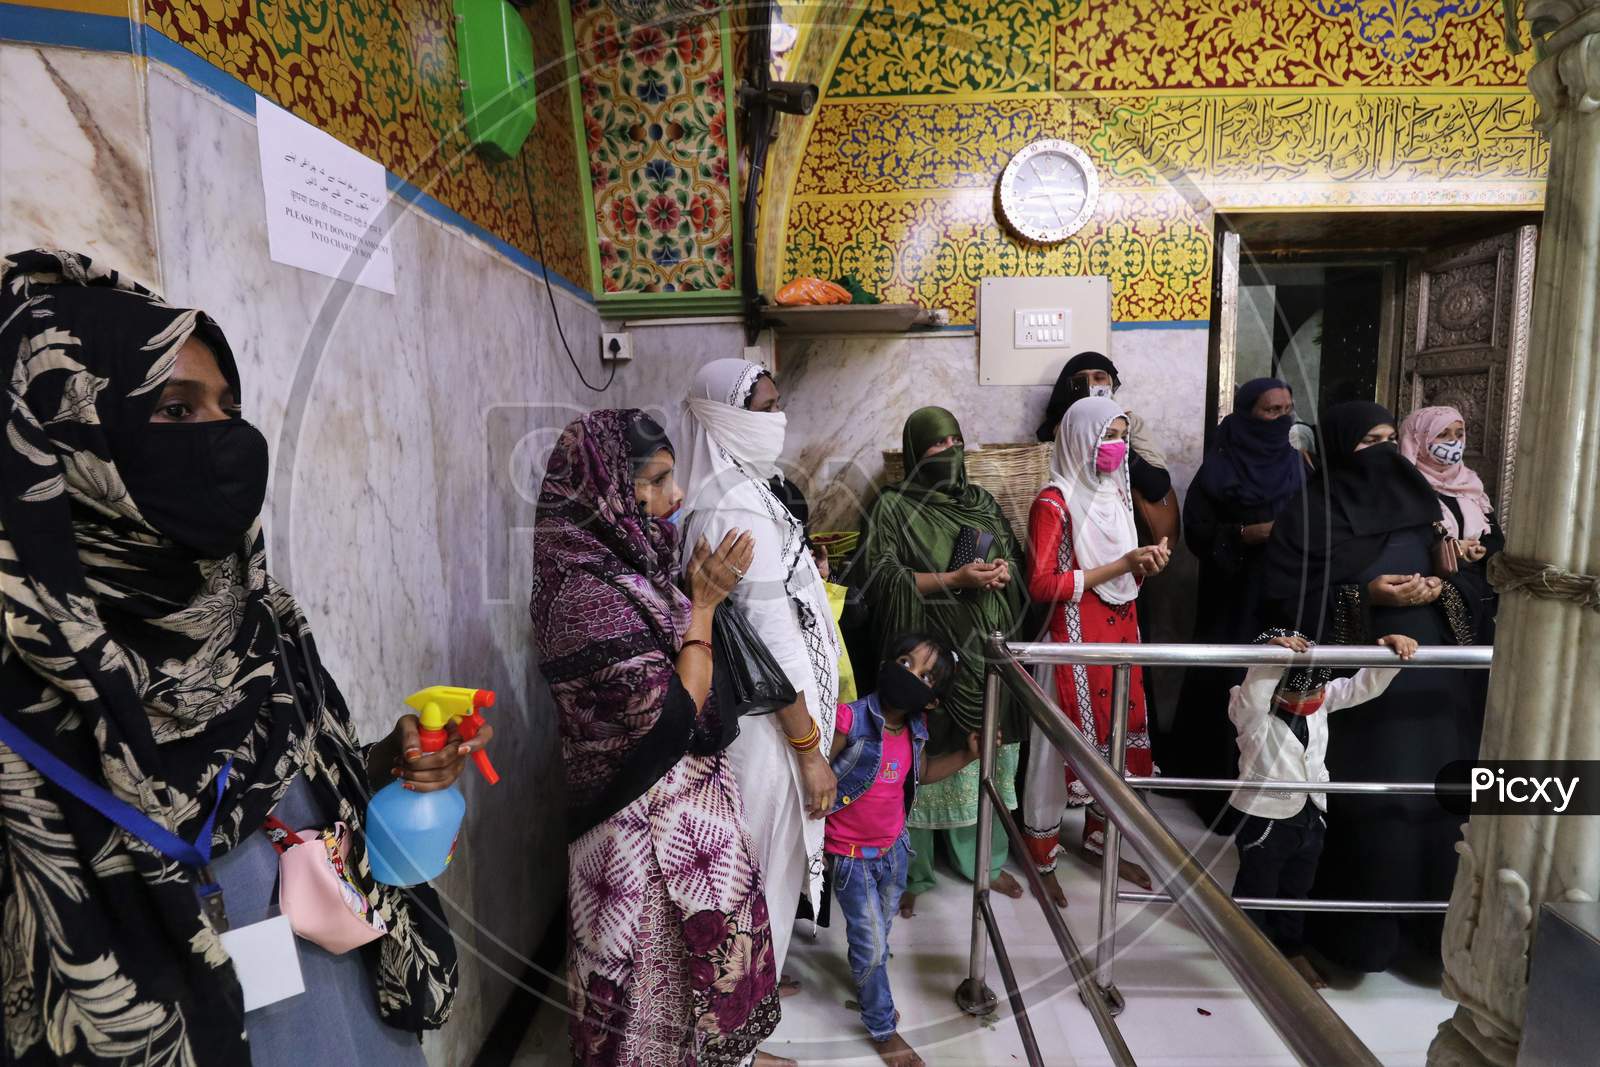 Women wearing protective masks pray inside a shrine after religious places reopened for the public amid the spread of the coronavirus disease (COVID-19) in Mumbai, India in November, 2020.